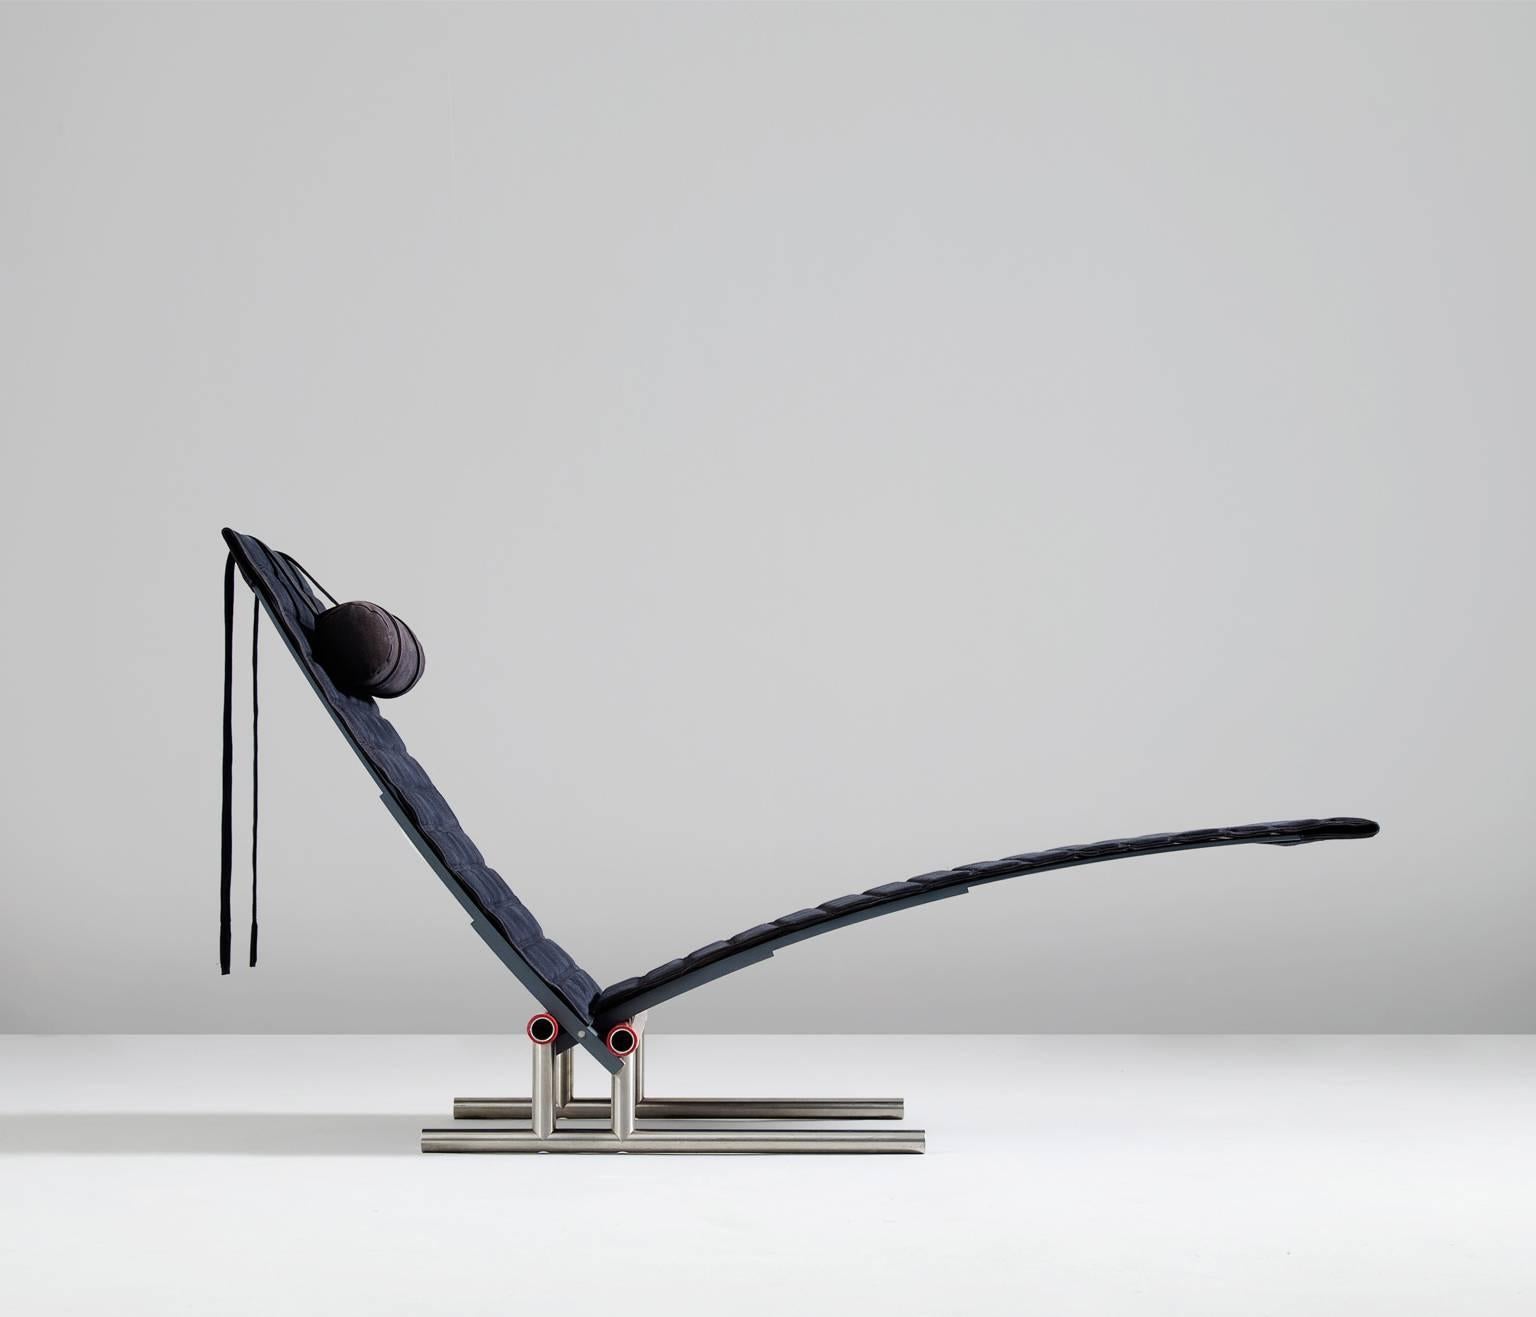 Chaise longue, stainless steel, lacquered wood and fabric, designed by Erik Krogh, produced by Johannes Hansen, Denmark, 1982. 

Elegant and modern chaise longue by Erik Krogh. The frame is made from grey lacquered wood, the legs from stainless